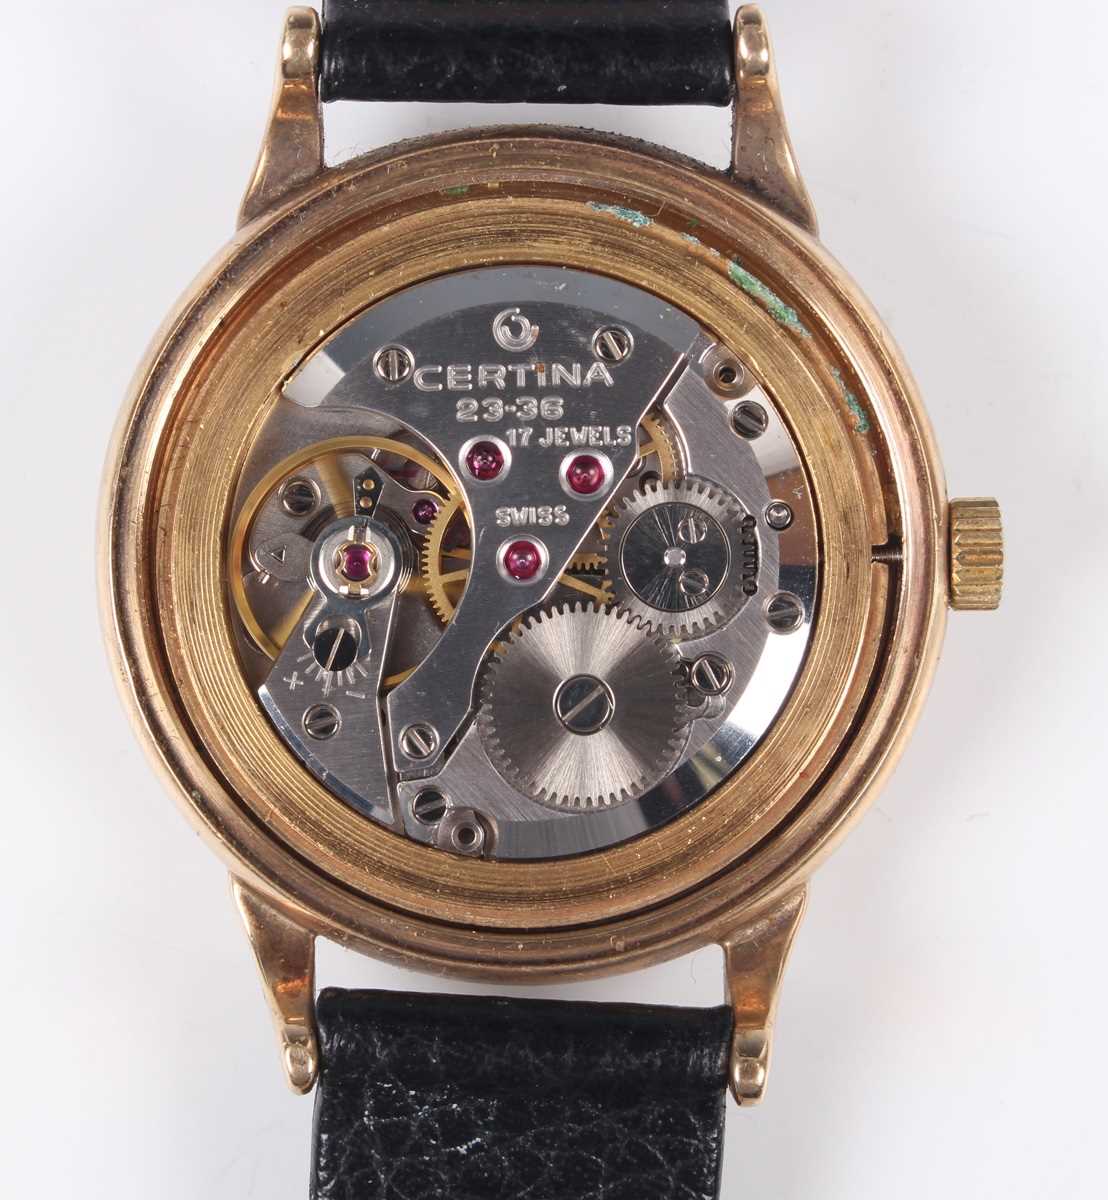 A Certina 9ct gold circular cased gentleman’s wristwatch with signed and jewelled 23-36 caliber - Image 2 of 6